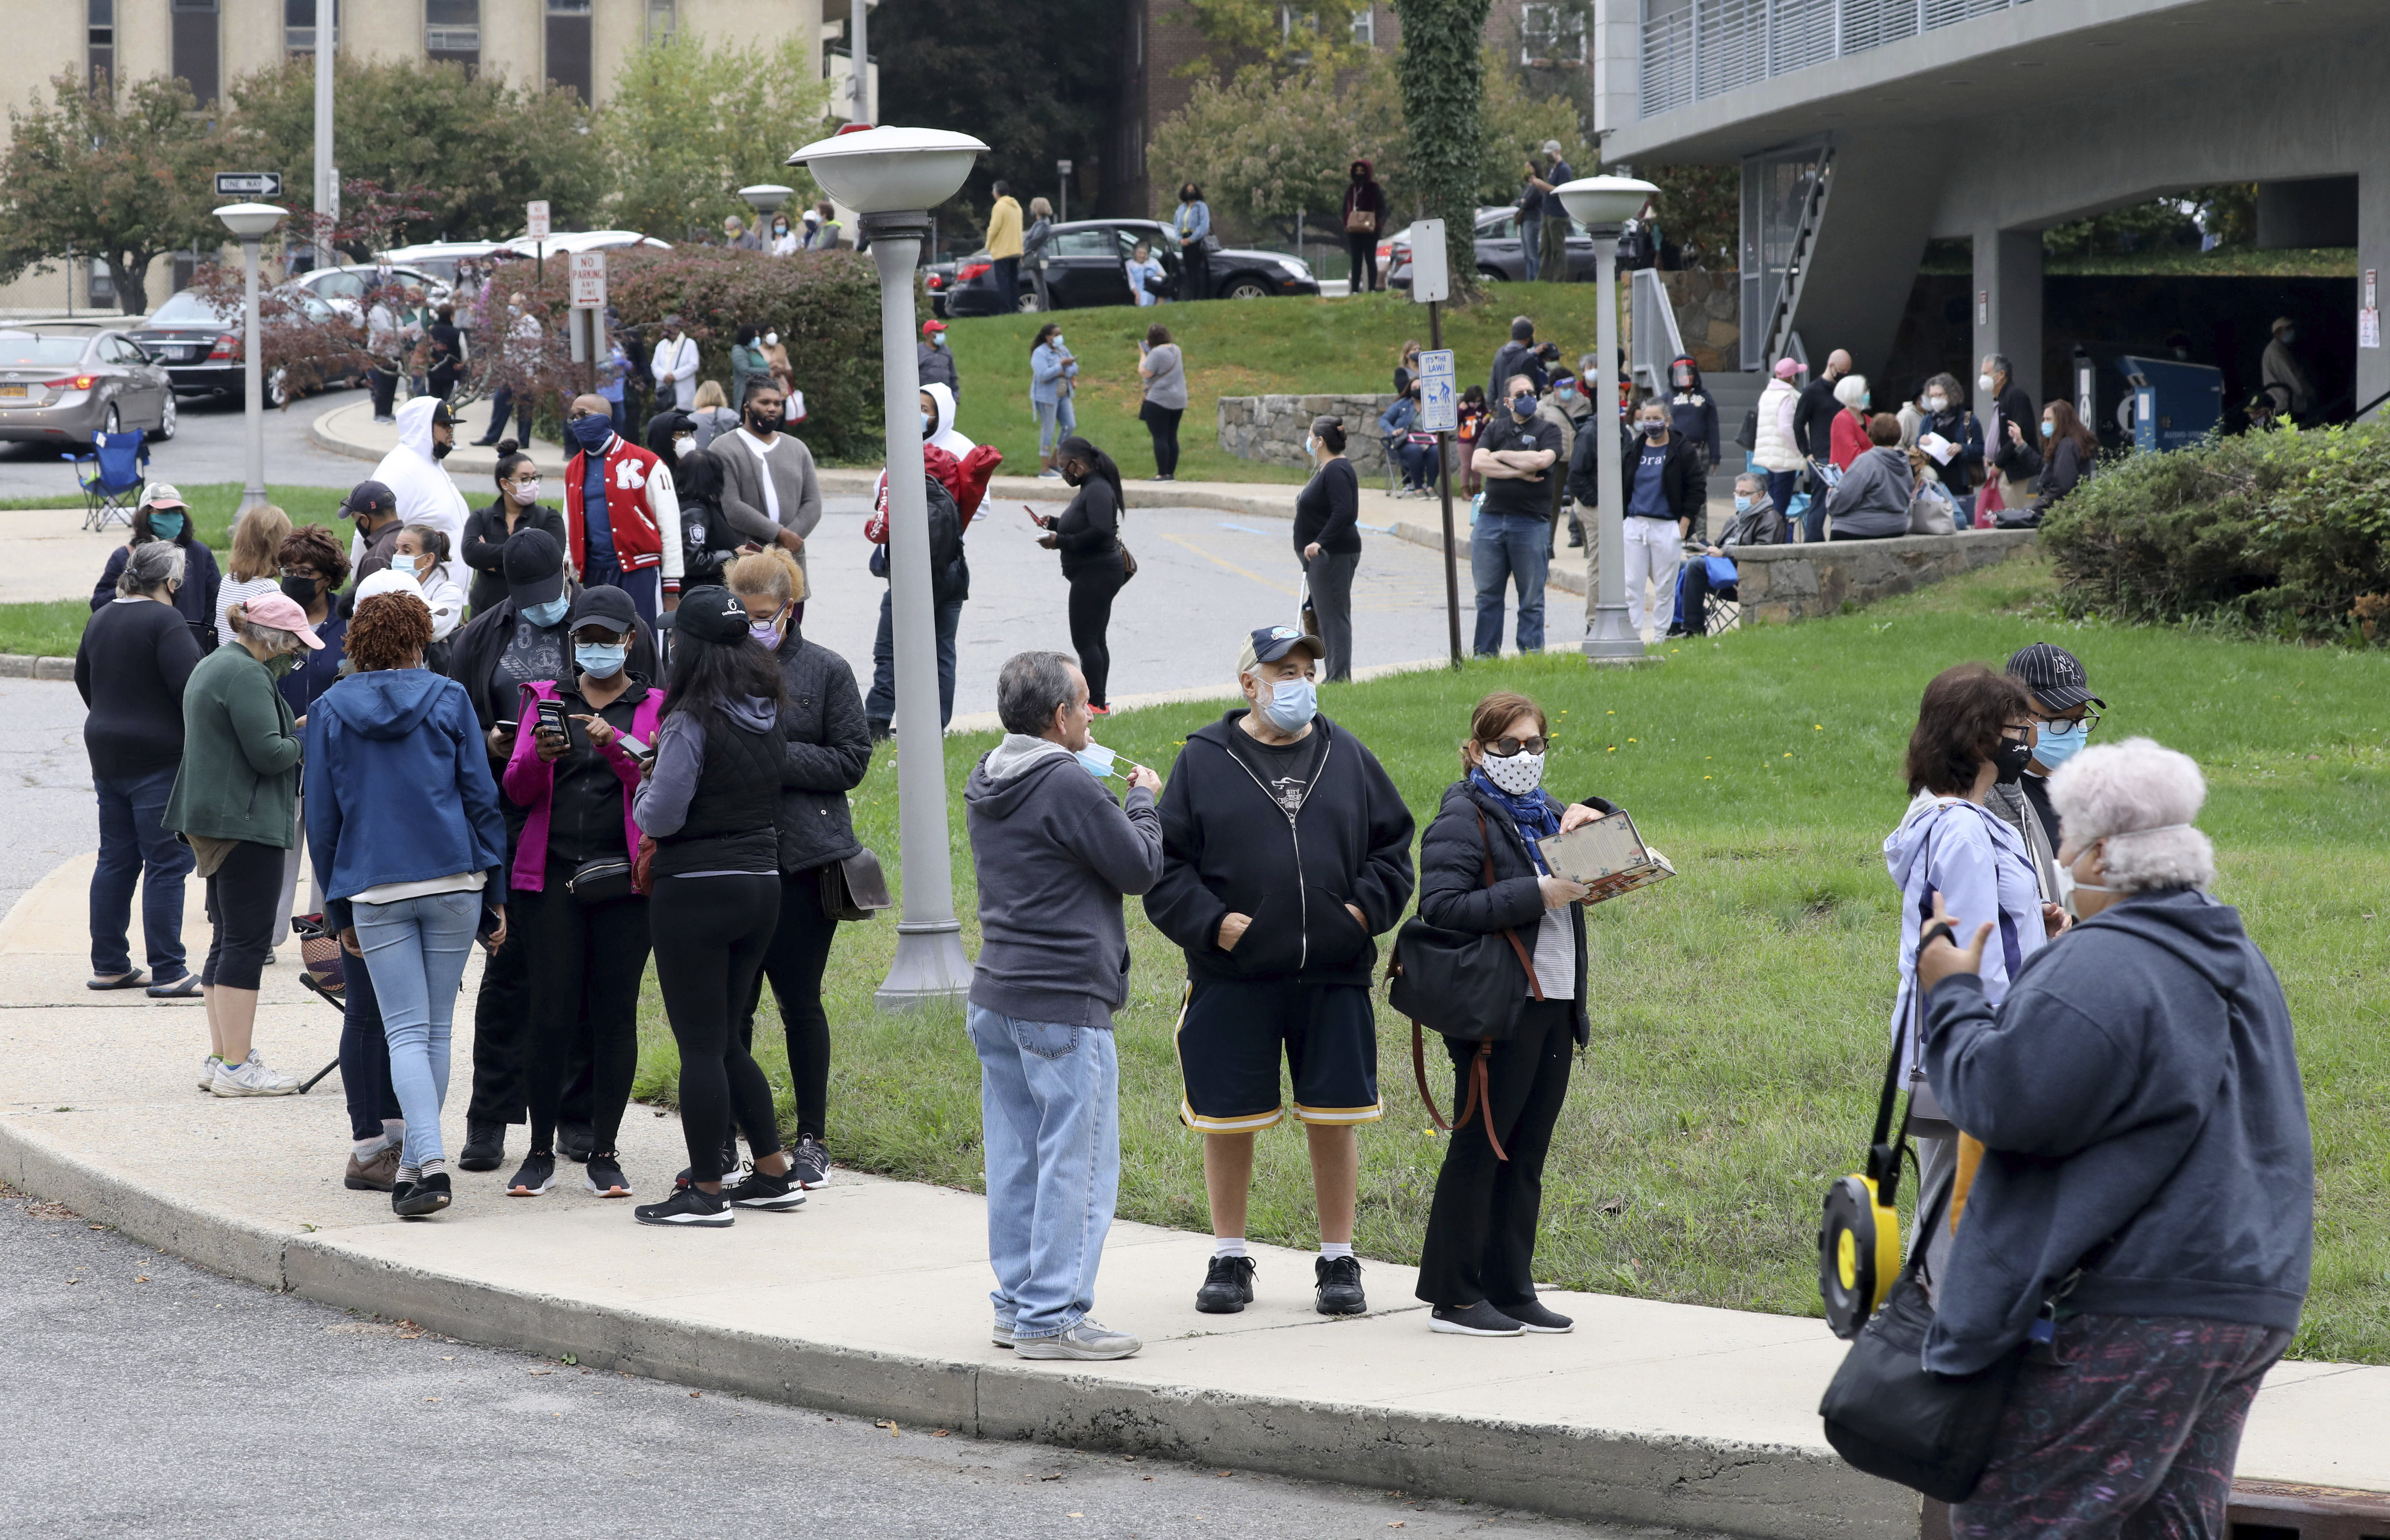 Voters line up in front of the Yonkers Public Library in Yonkers, as  the first day of early voting in the presidential election begins across New York state.